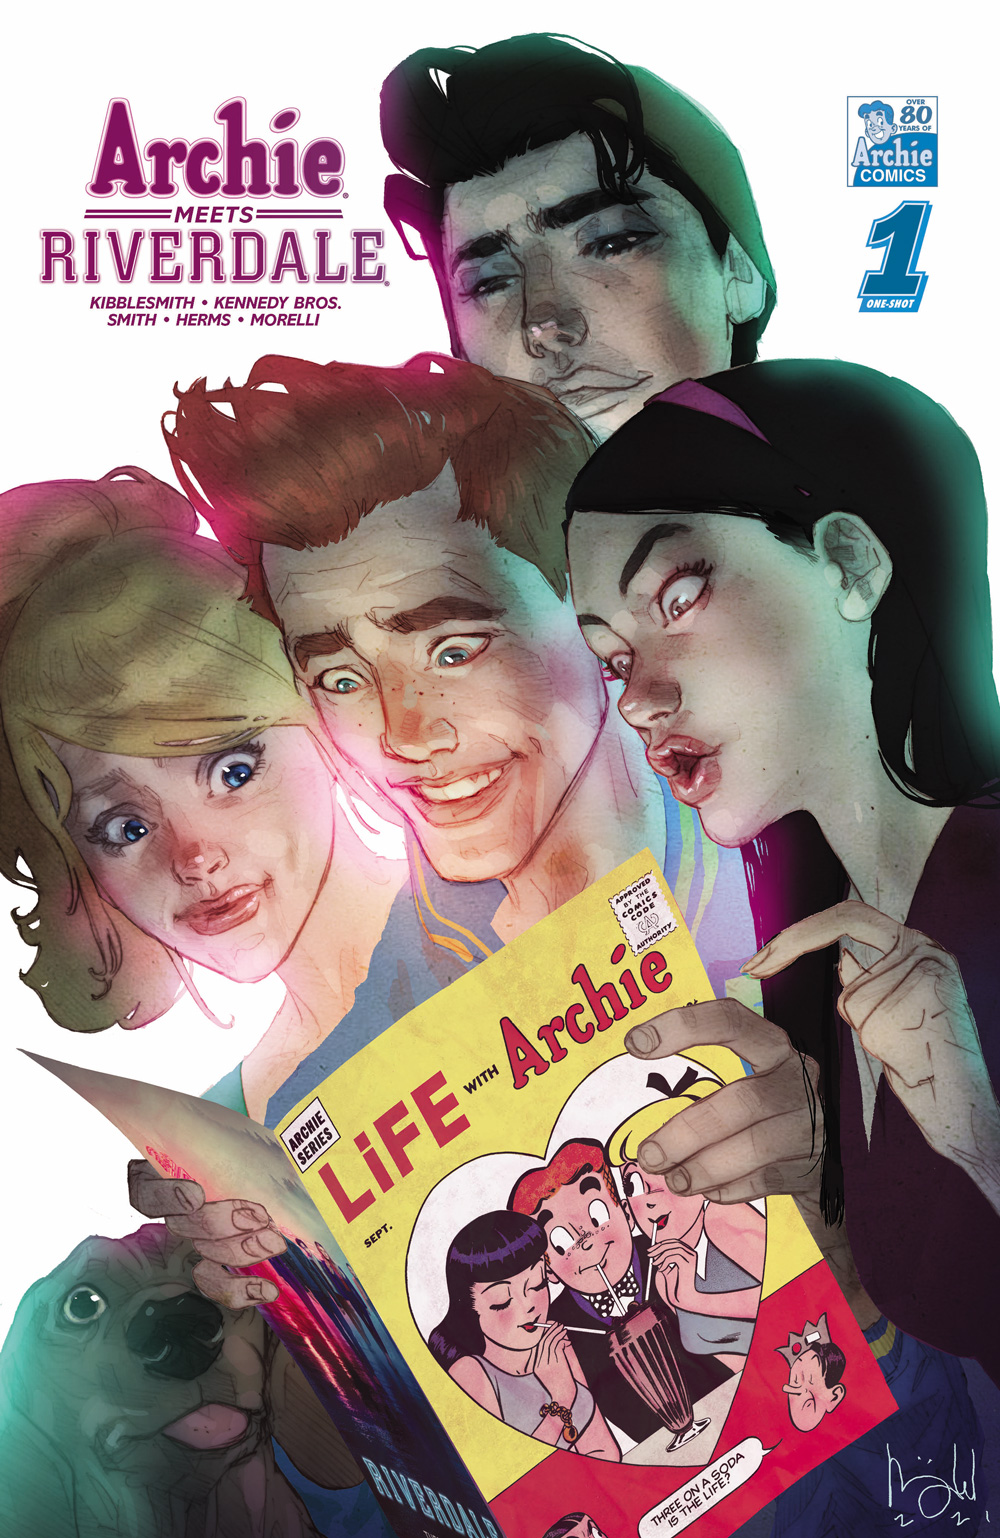 ARCHIE MEETS RIVERDALE #1 variant cover by Ben Caldwell